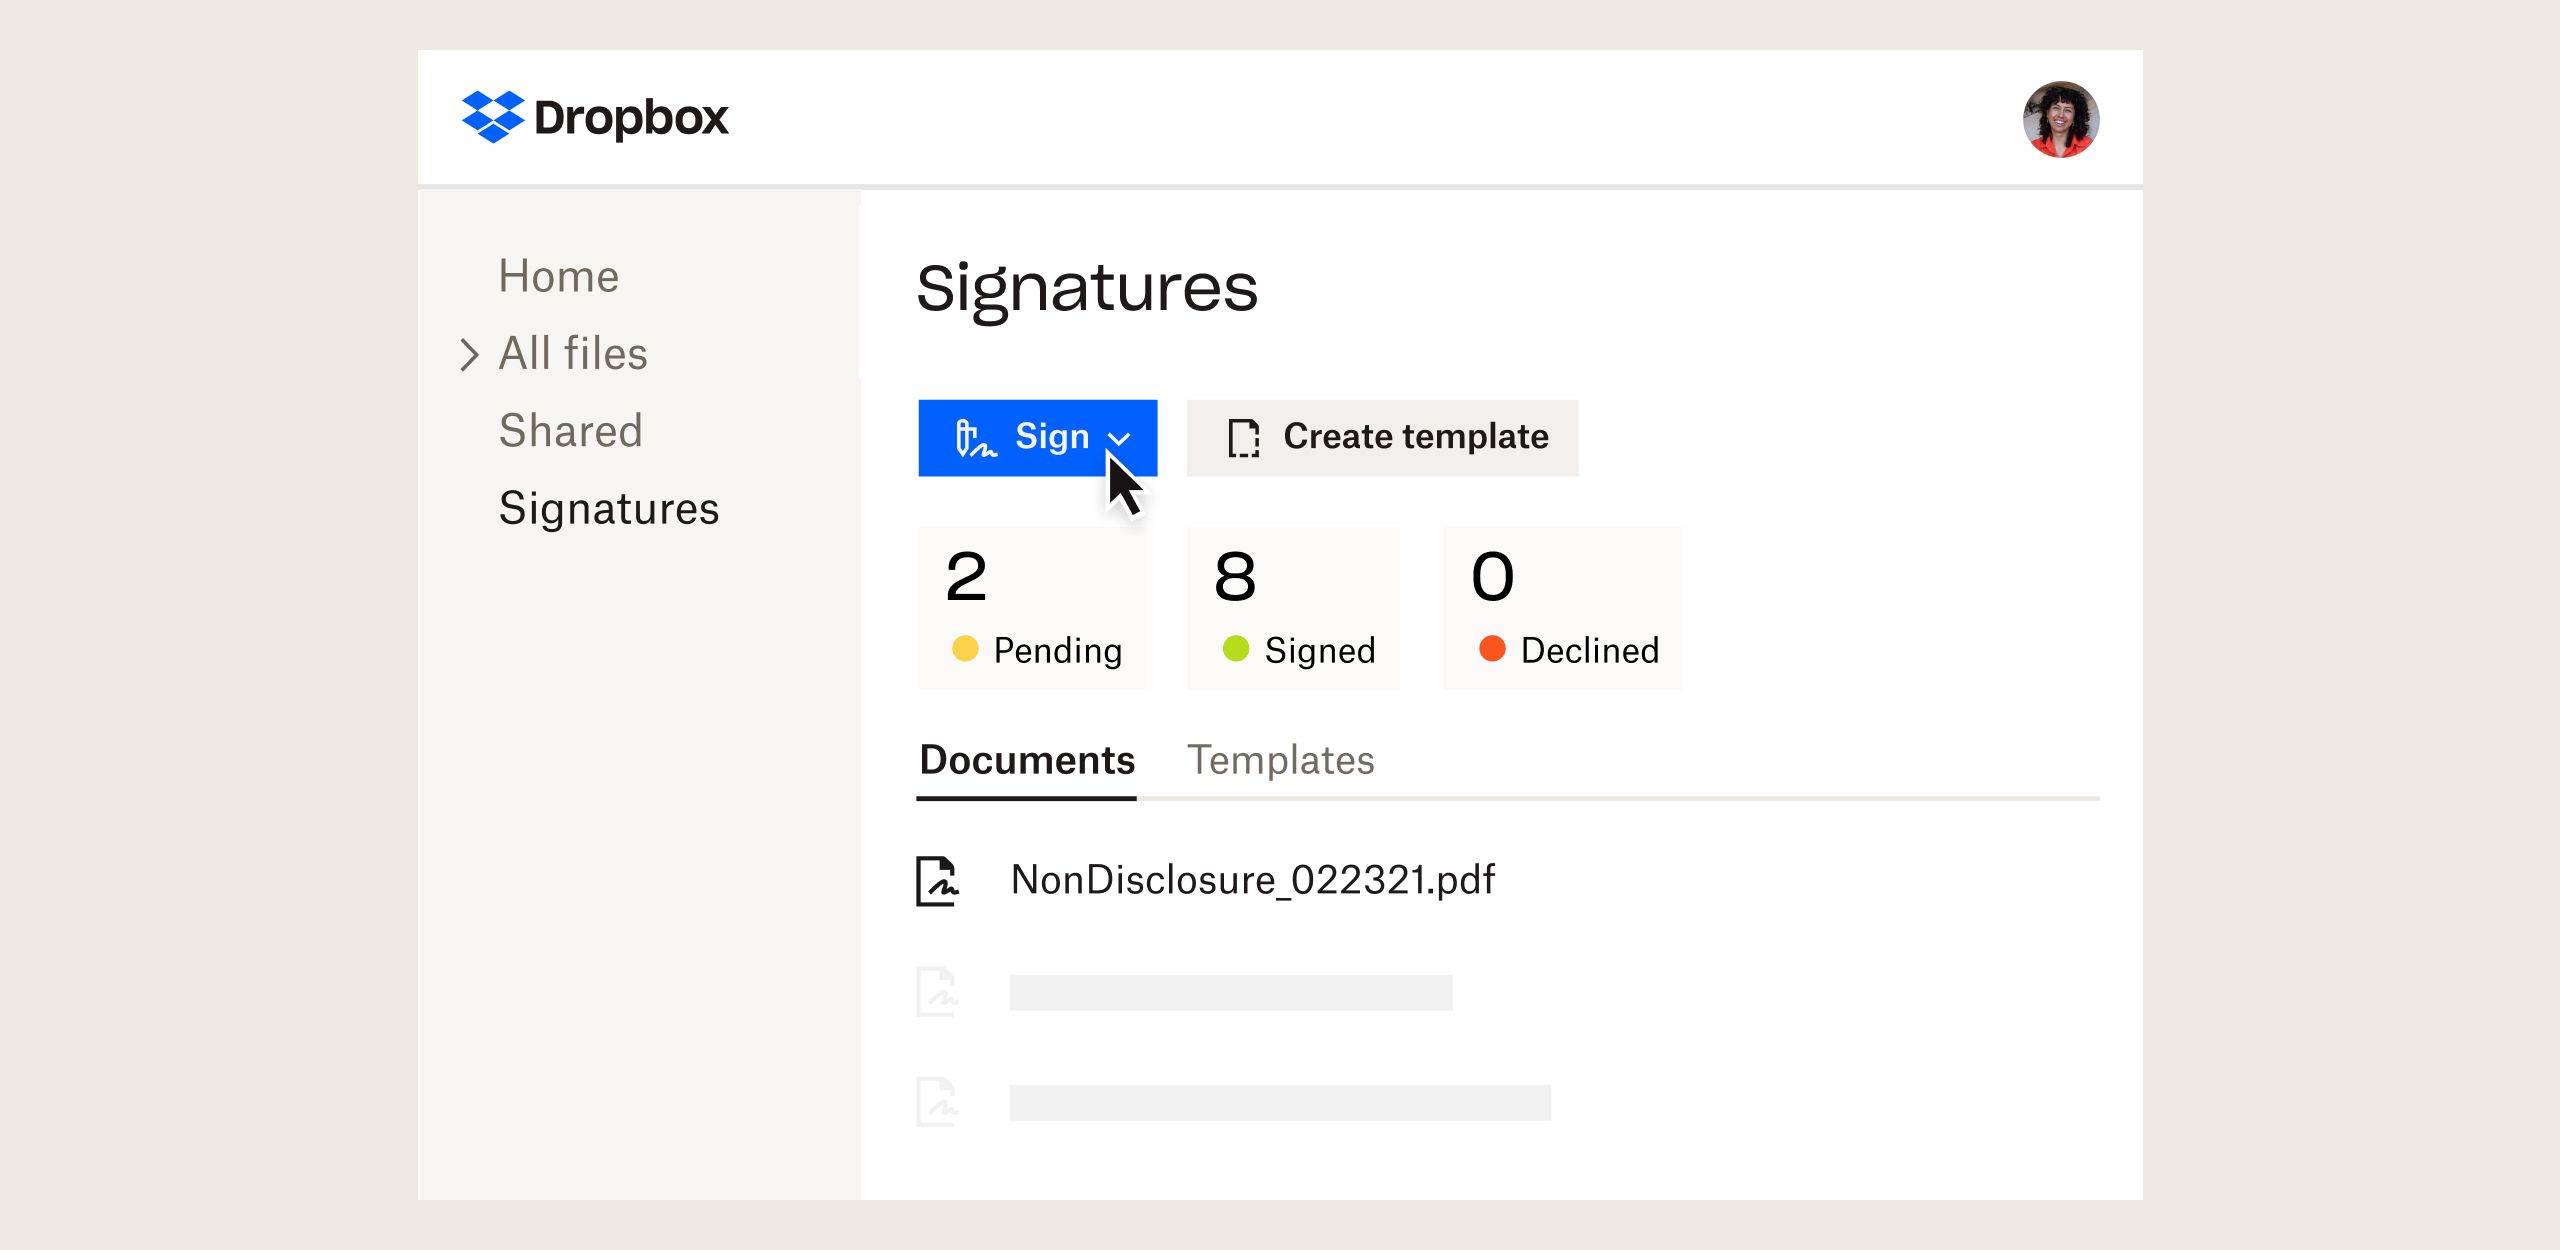 Product UI shows eSignature functionality in Dropbox 